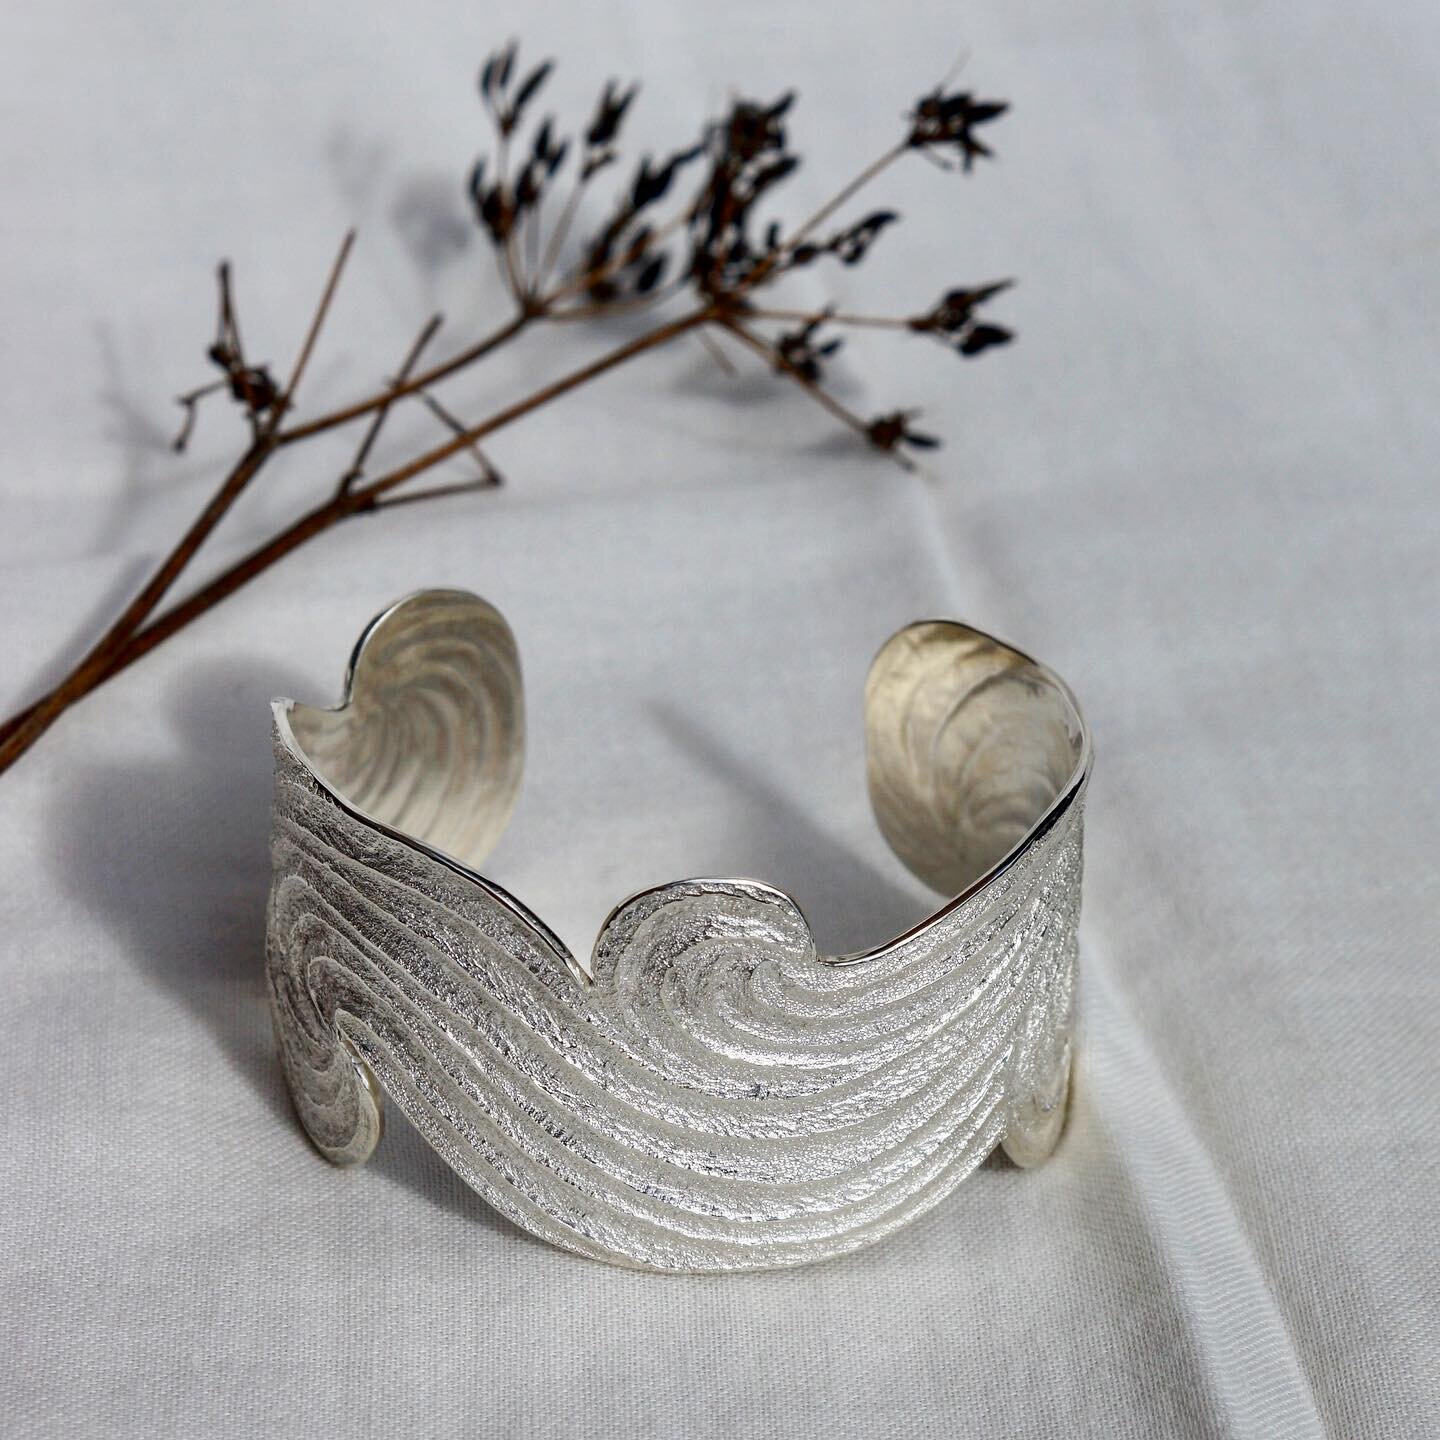 &bull; Tiny Wave Cuff ~  Solid silver cuff with Chased details of swirling waves &bull; 
.
.
This and more from The Chasing Waves Collection can be seen and purchased online ~  See the link in my Bio. 
.
.
.
.
.
#Shine2020 #chasingwavescollection #go